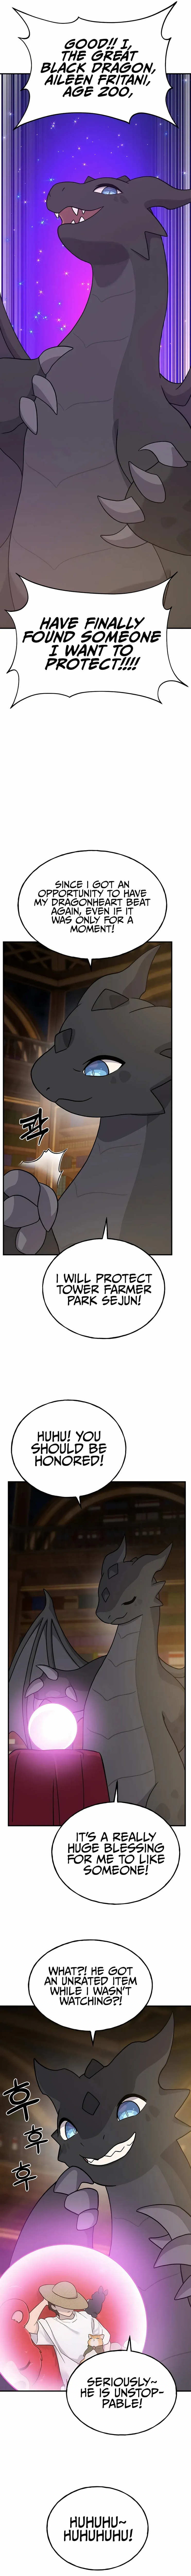 Solo Farming In The Tower chapter 29